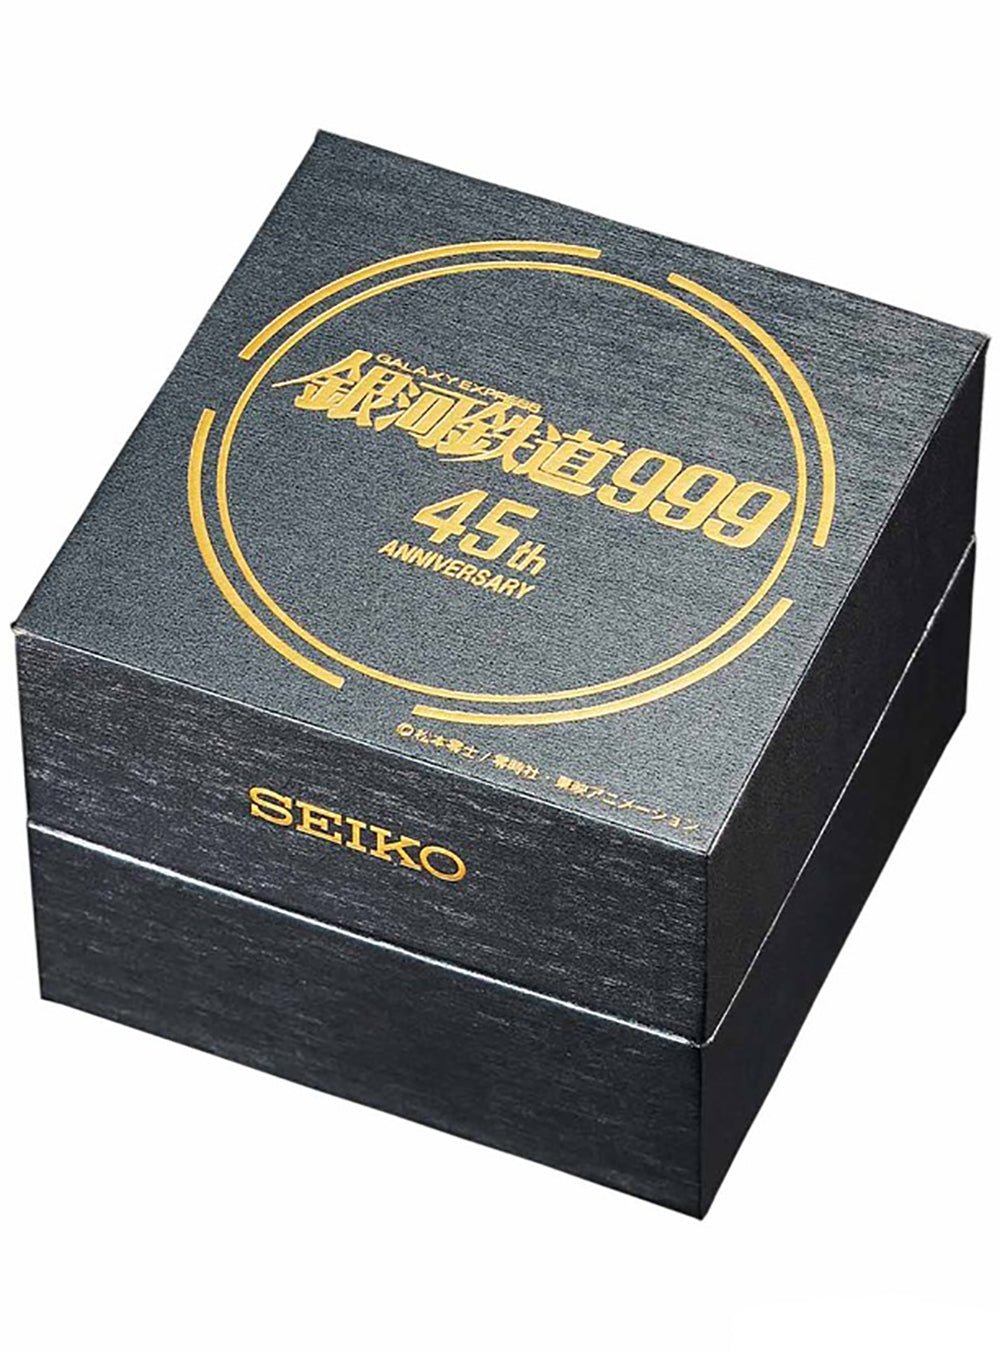 SEIKO GALAXY EXPRESS 999 45TH ANNIVERSARY WATCH LIMITED EDITION MADE IN JAPANWRISTWATCHjapan-select